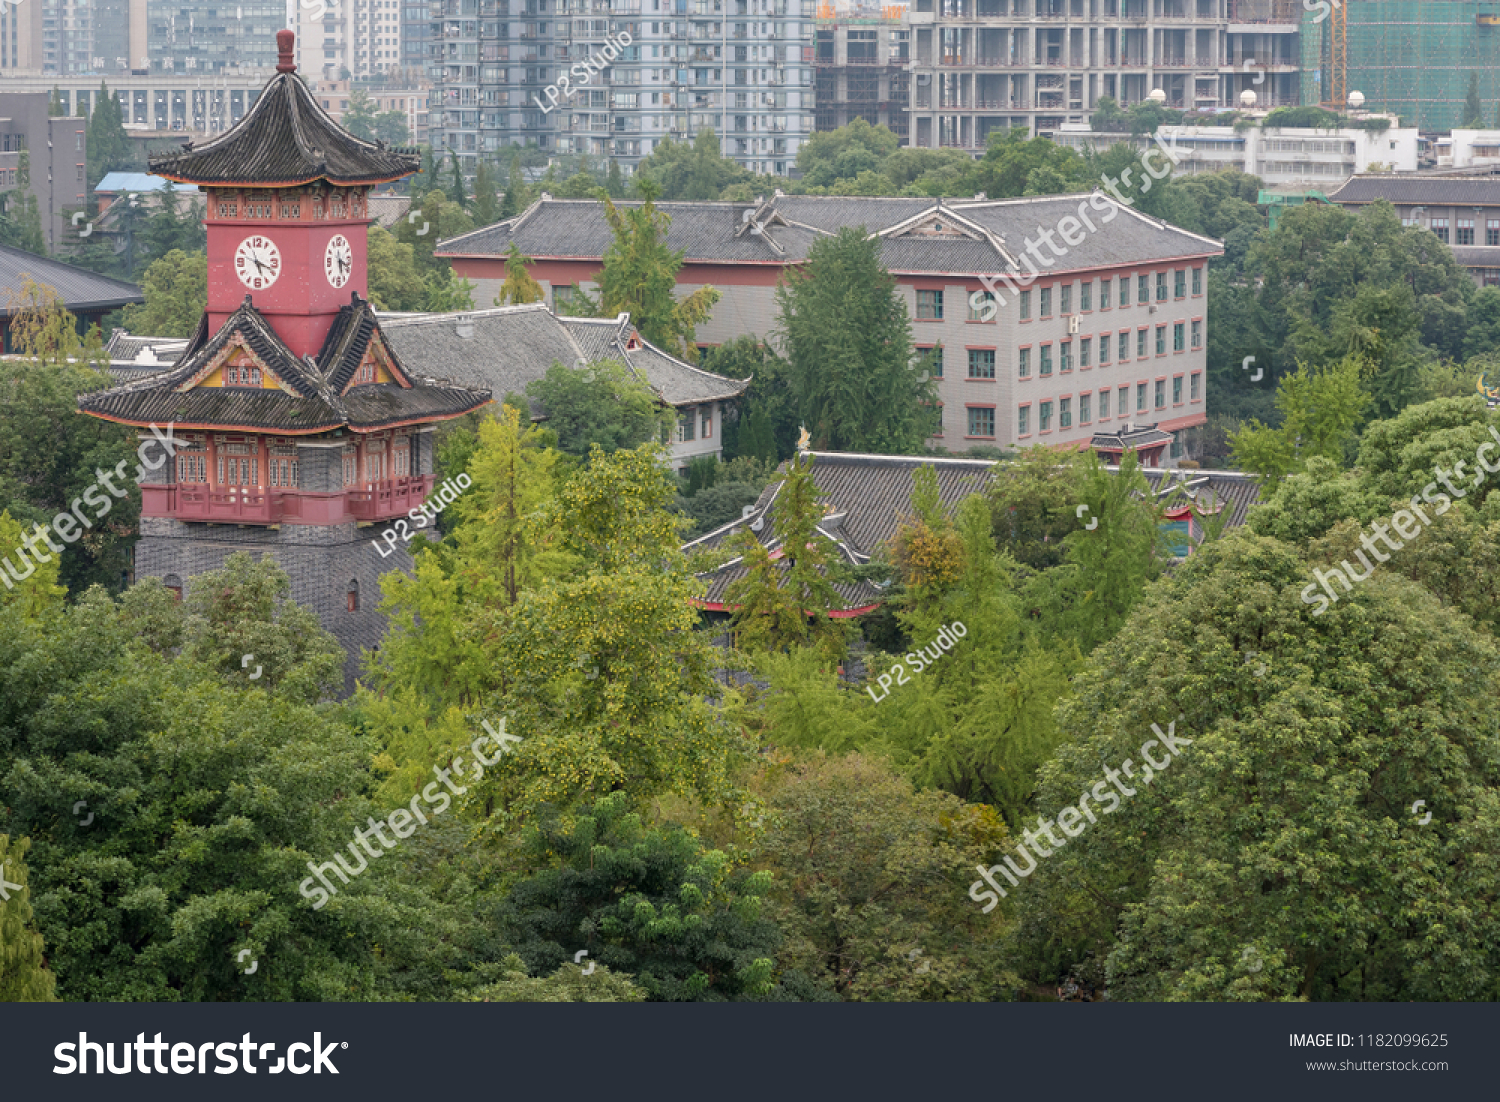 Chengdu, Sichuan Province, China - Sept 17, 2017 : Clock tower of Huaxi West China University of Medical Sciences aerial view #1182099625